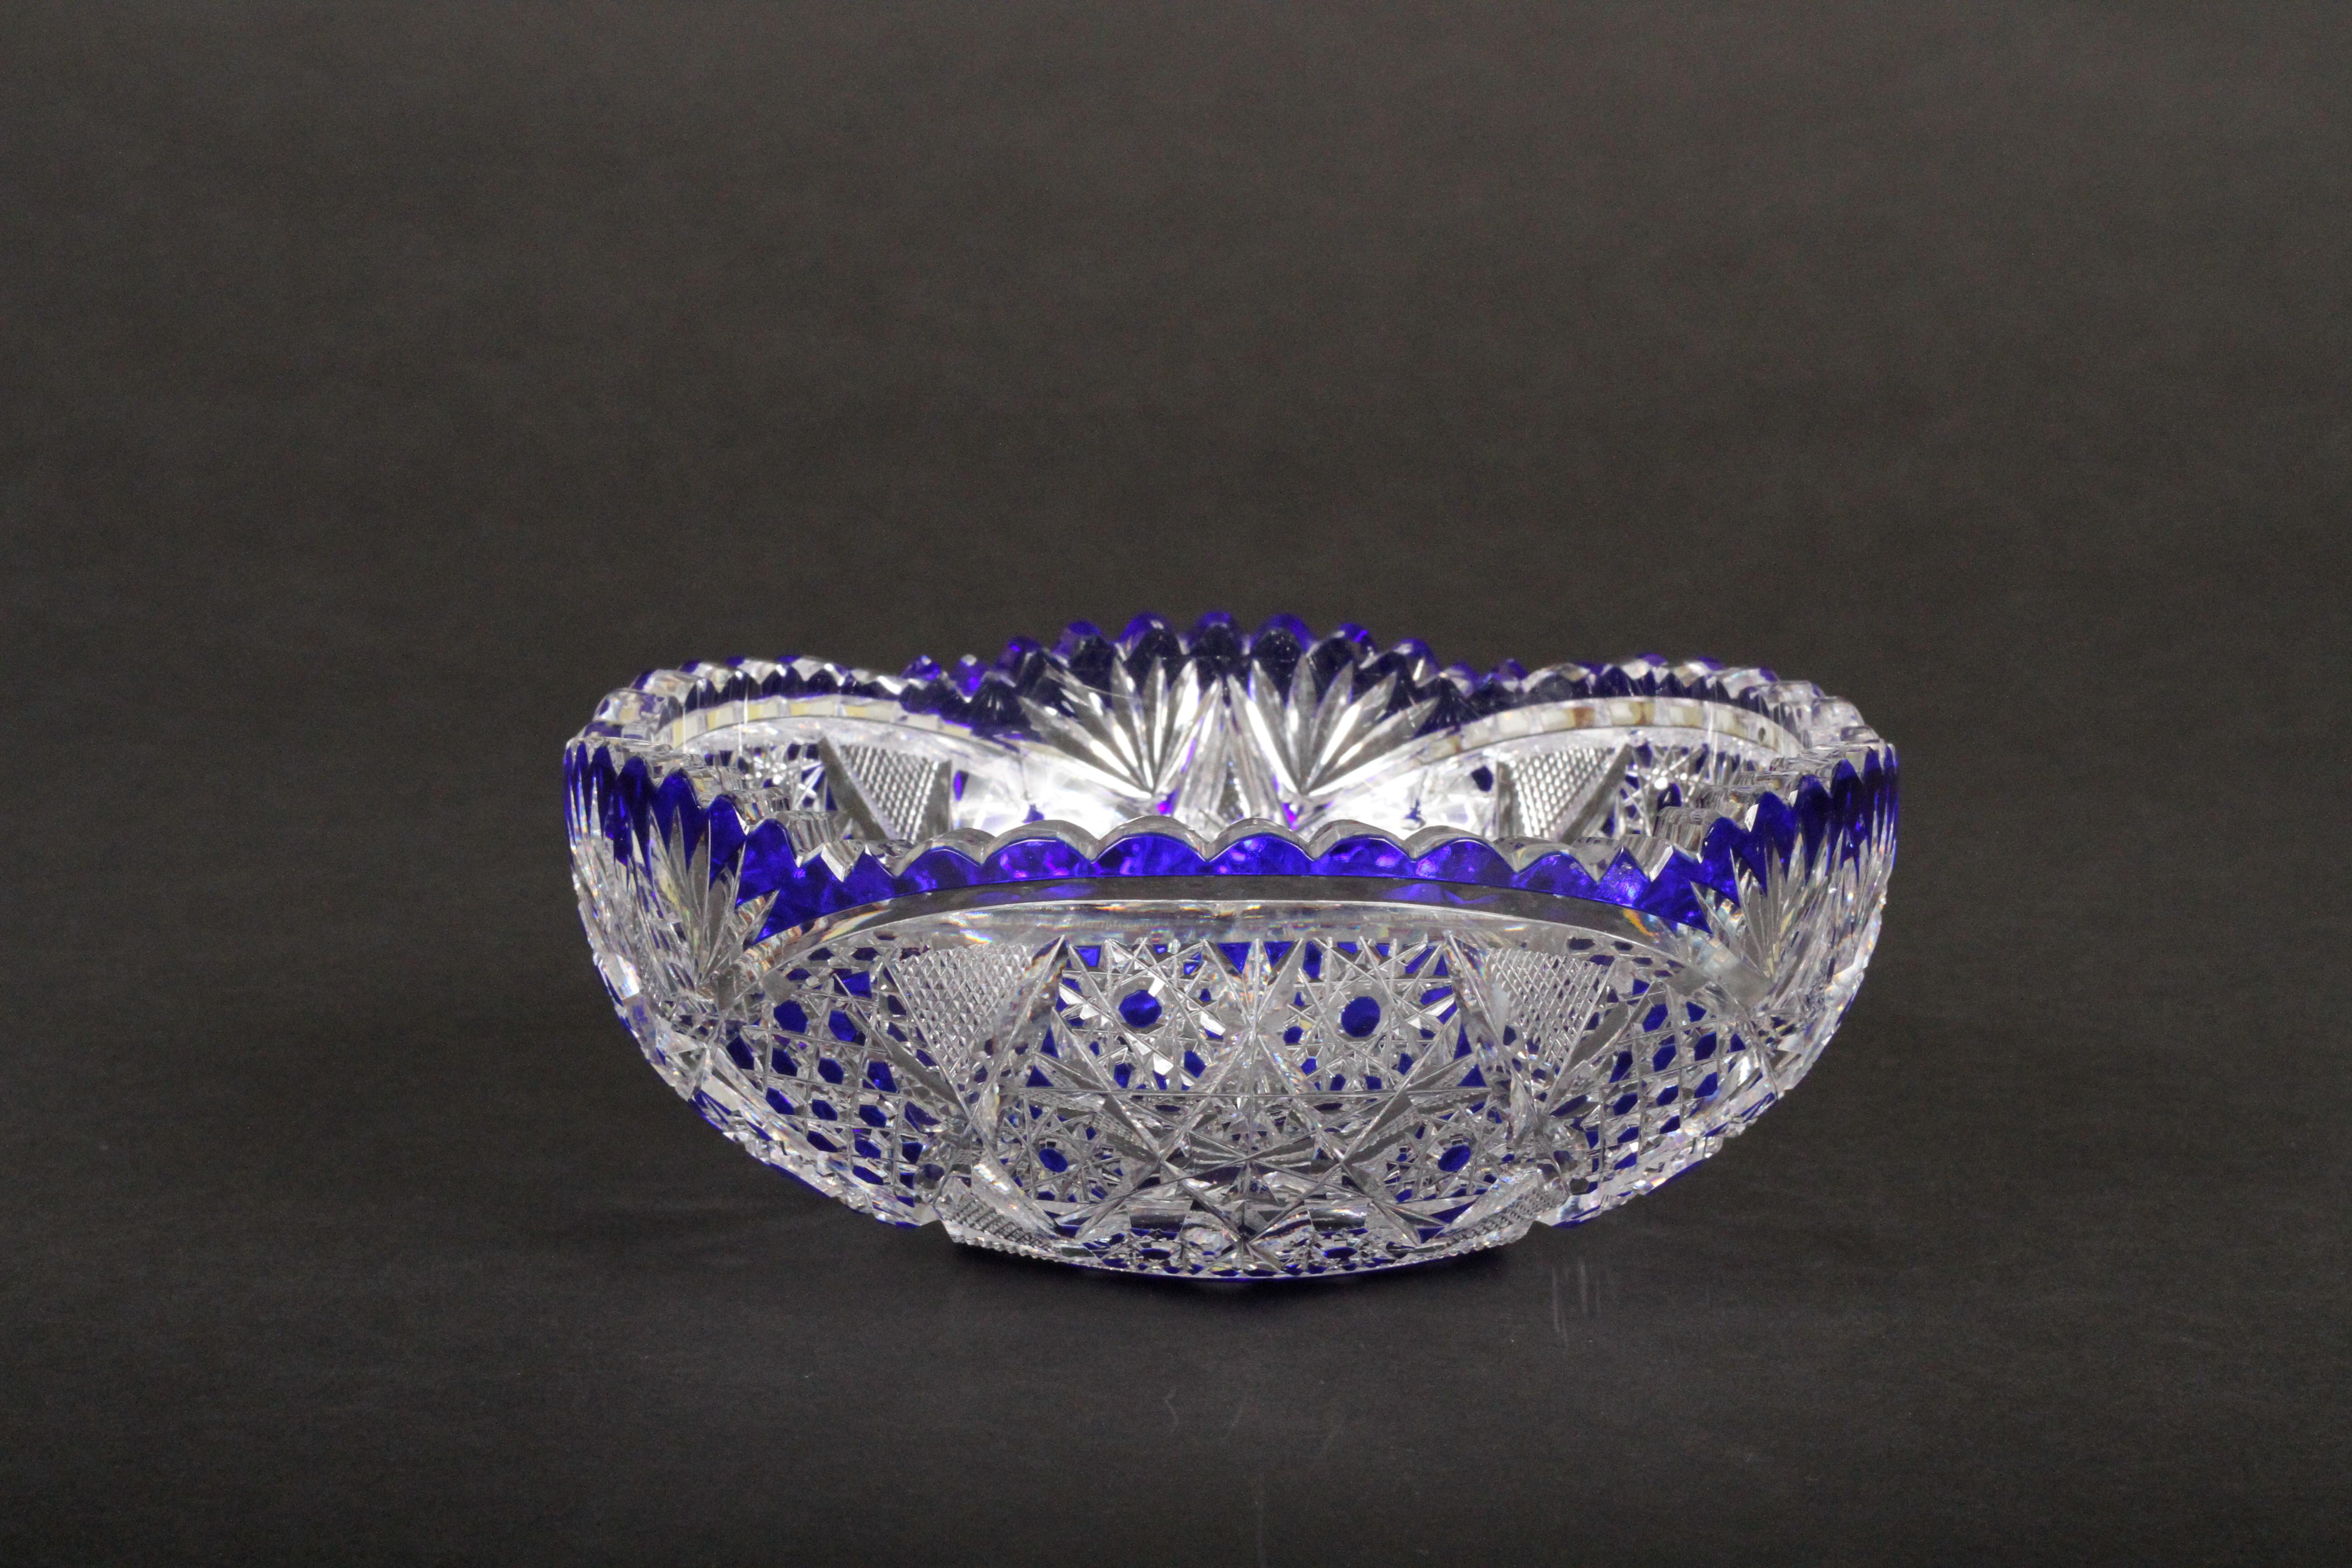 This wonderful cobalt blue cut-to-clear glass round bowl is from Cristalleries du Val Saint-Lambert, Belgium. This piece is hand blown and handcut. The geometric pattern features many deep cuts and cross-cuts that increase the brilliancy of the